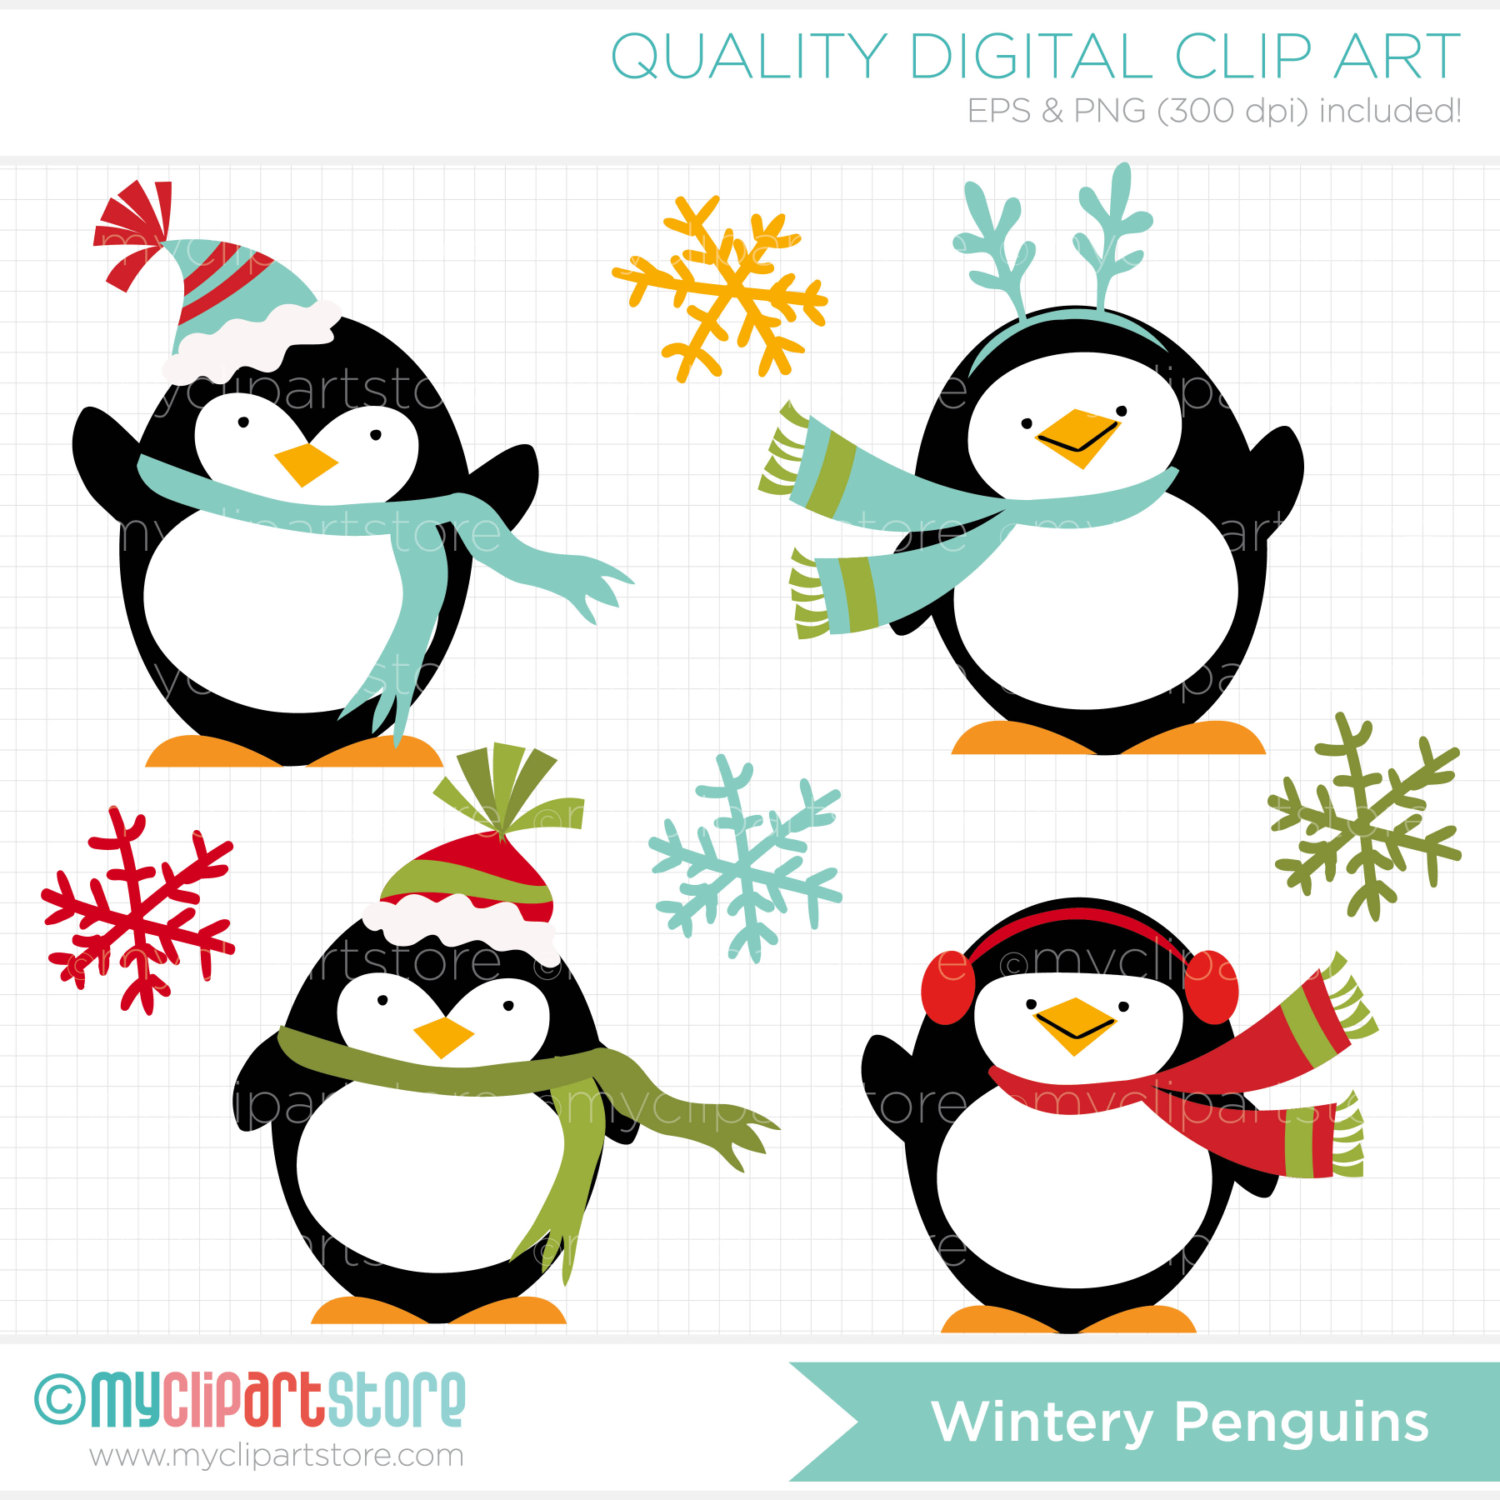 Winter Penguin Clipart Awesome Penguins With Cold Winter Penguin    